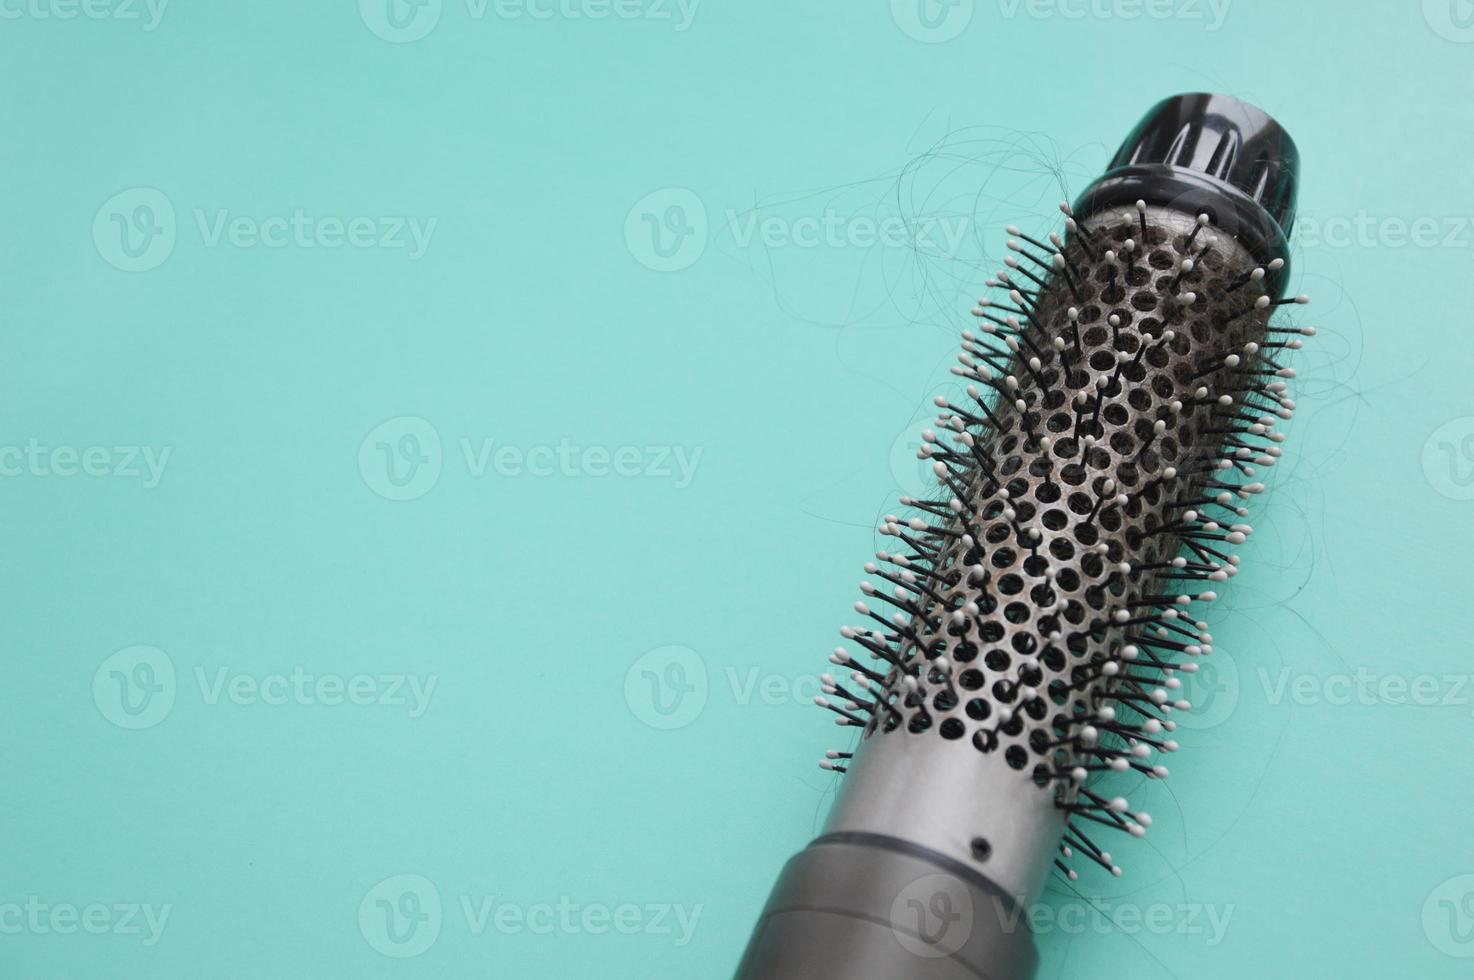 Coiled hair on an electric hair dryer after drying. Hair loss. Hairdryer with round brush. Rotating hair brush, styler, barber tool. Place for text photo